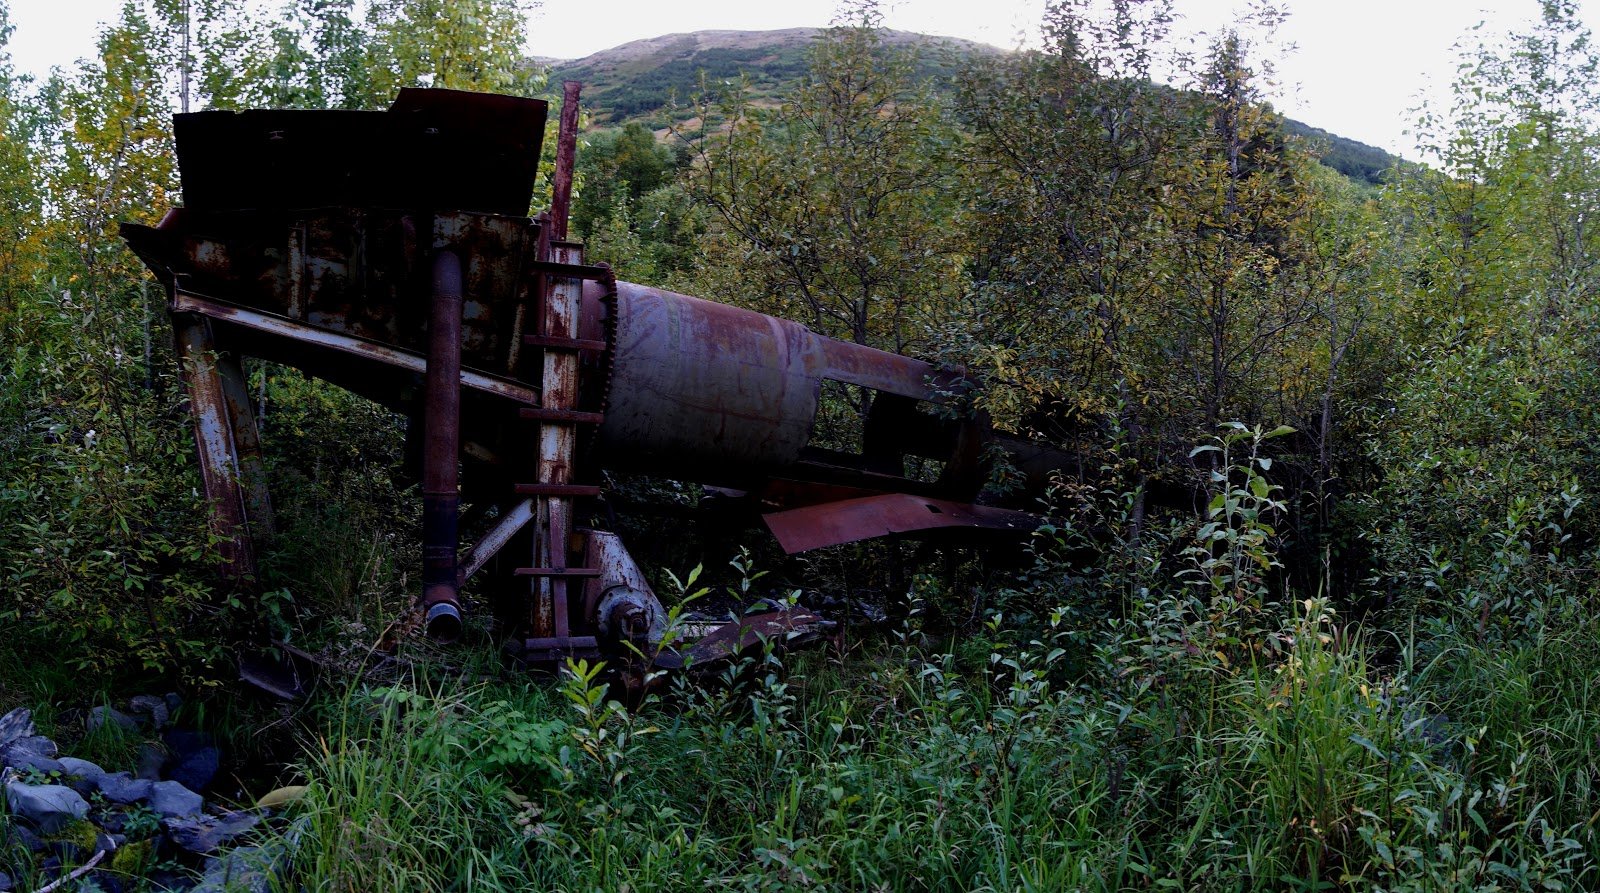 A grinder abandoned in a man-made channel along upper Mills Creek 4 miles from the Seward Highway